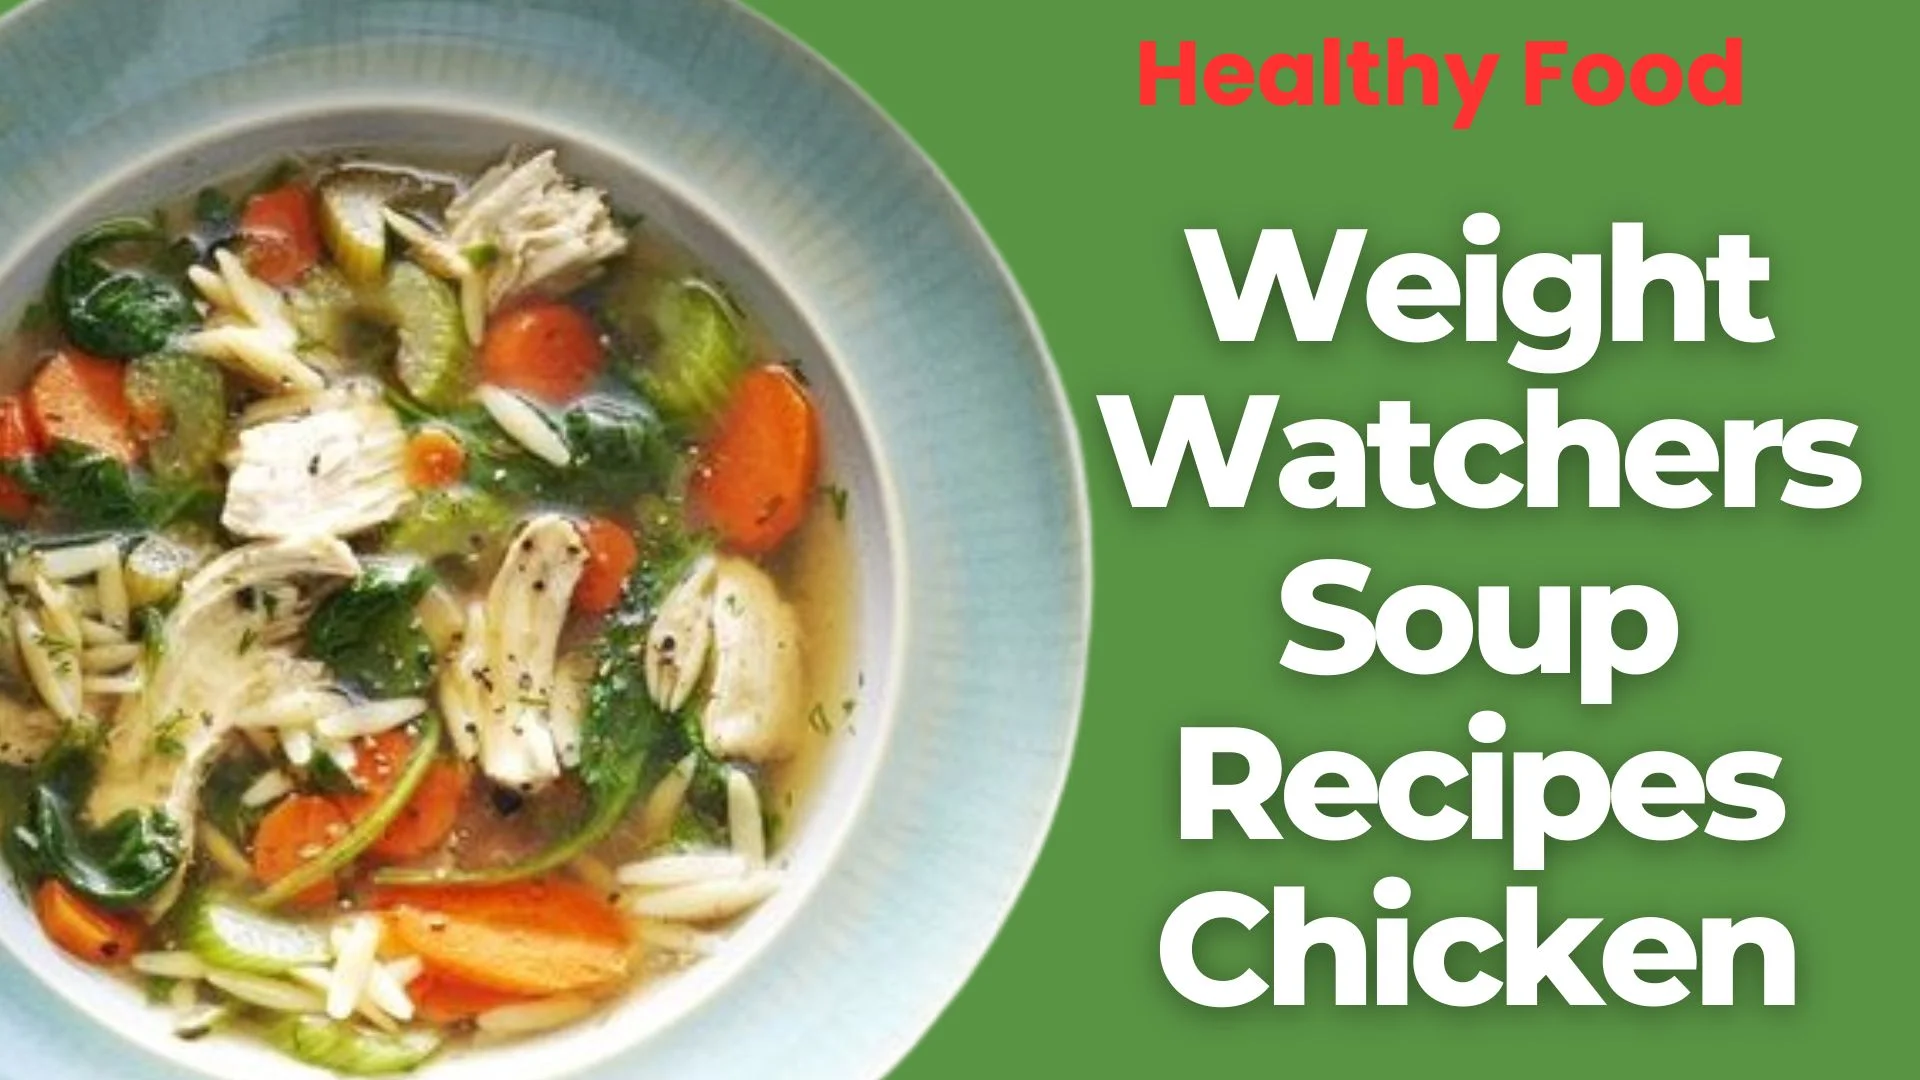 Weight Watchers Soup Recipes Chicken (Healthy Food)